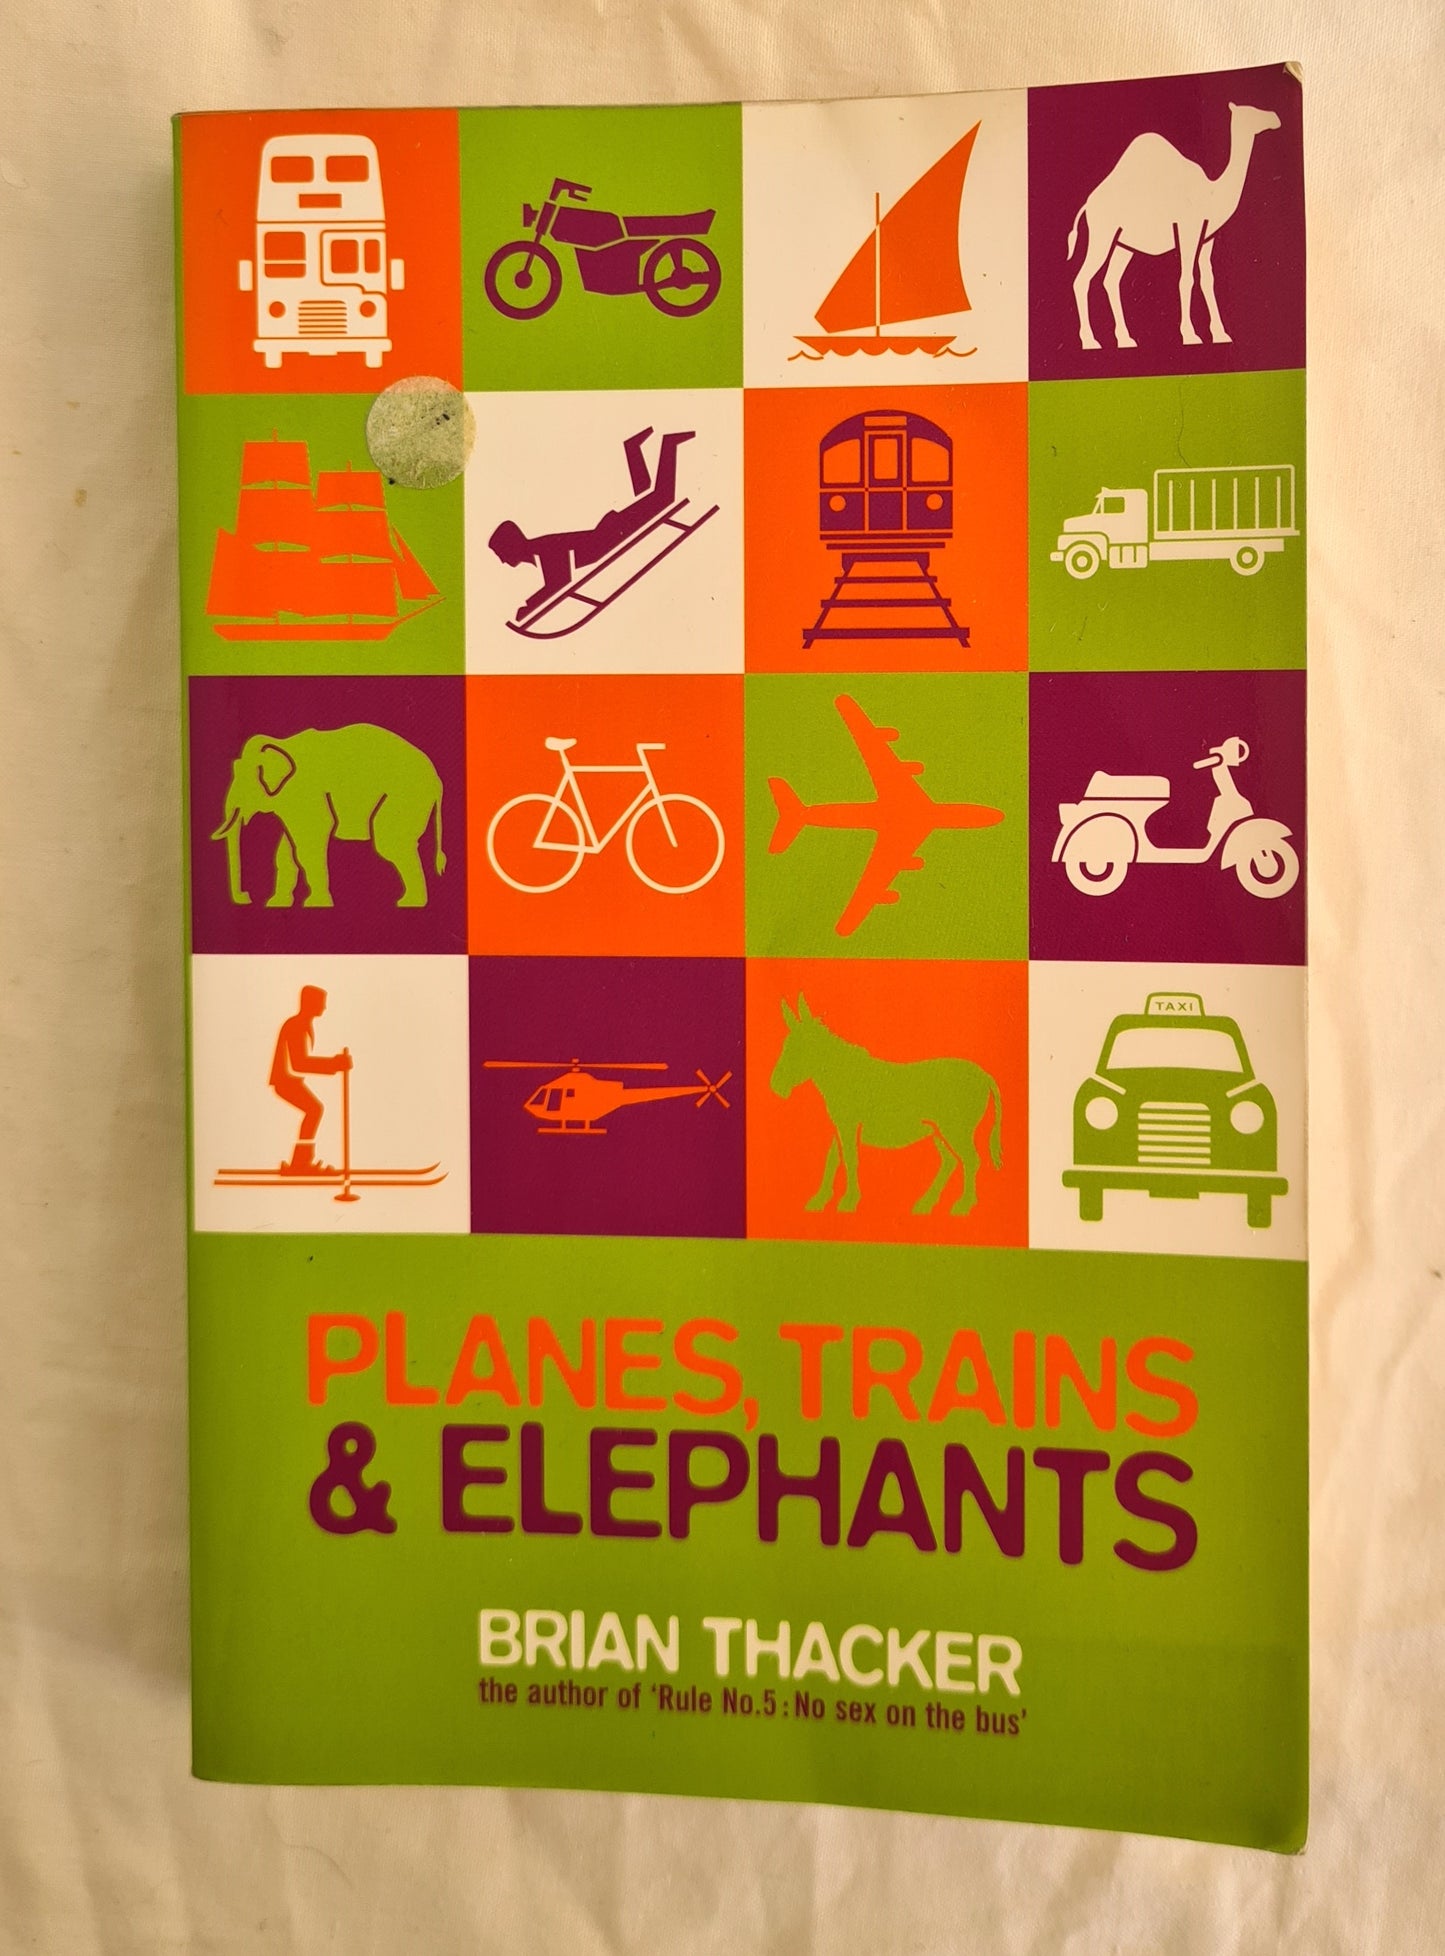 Planes, Trains and Elephants by Brian Thacker